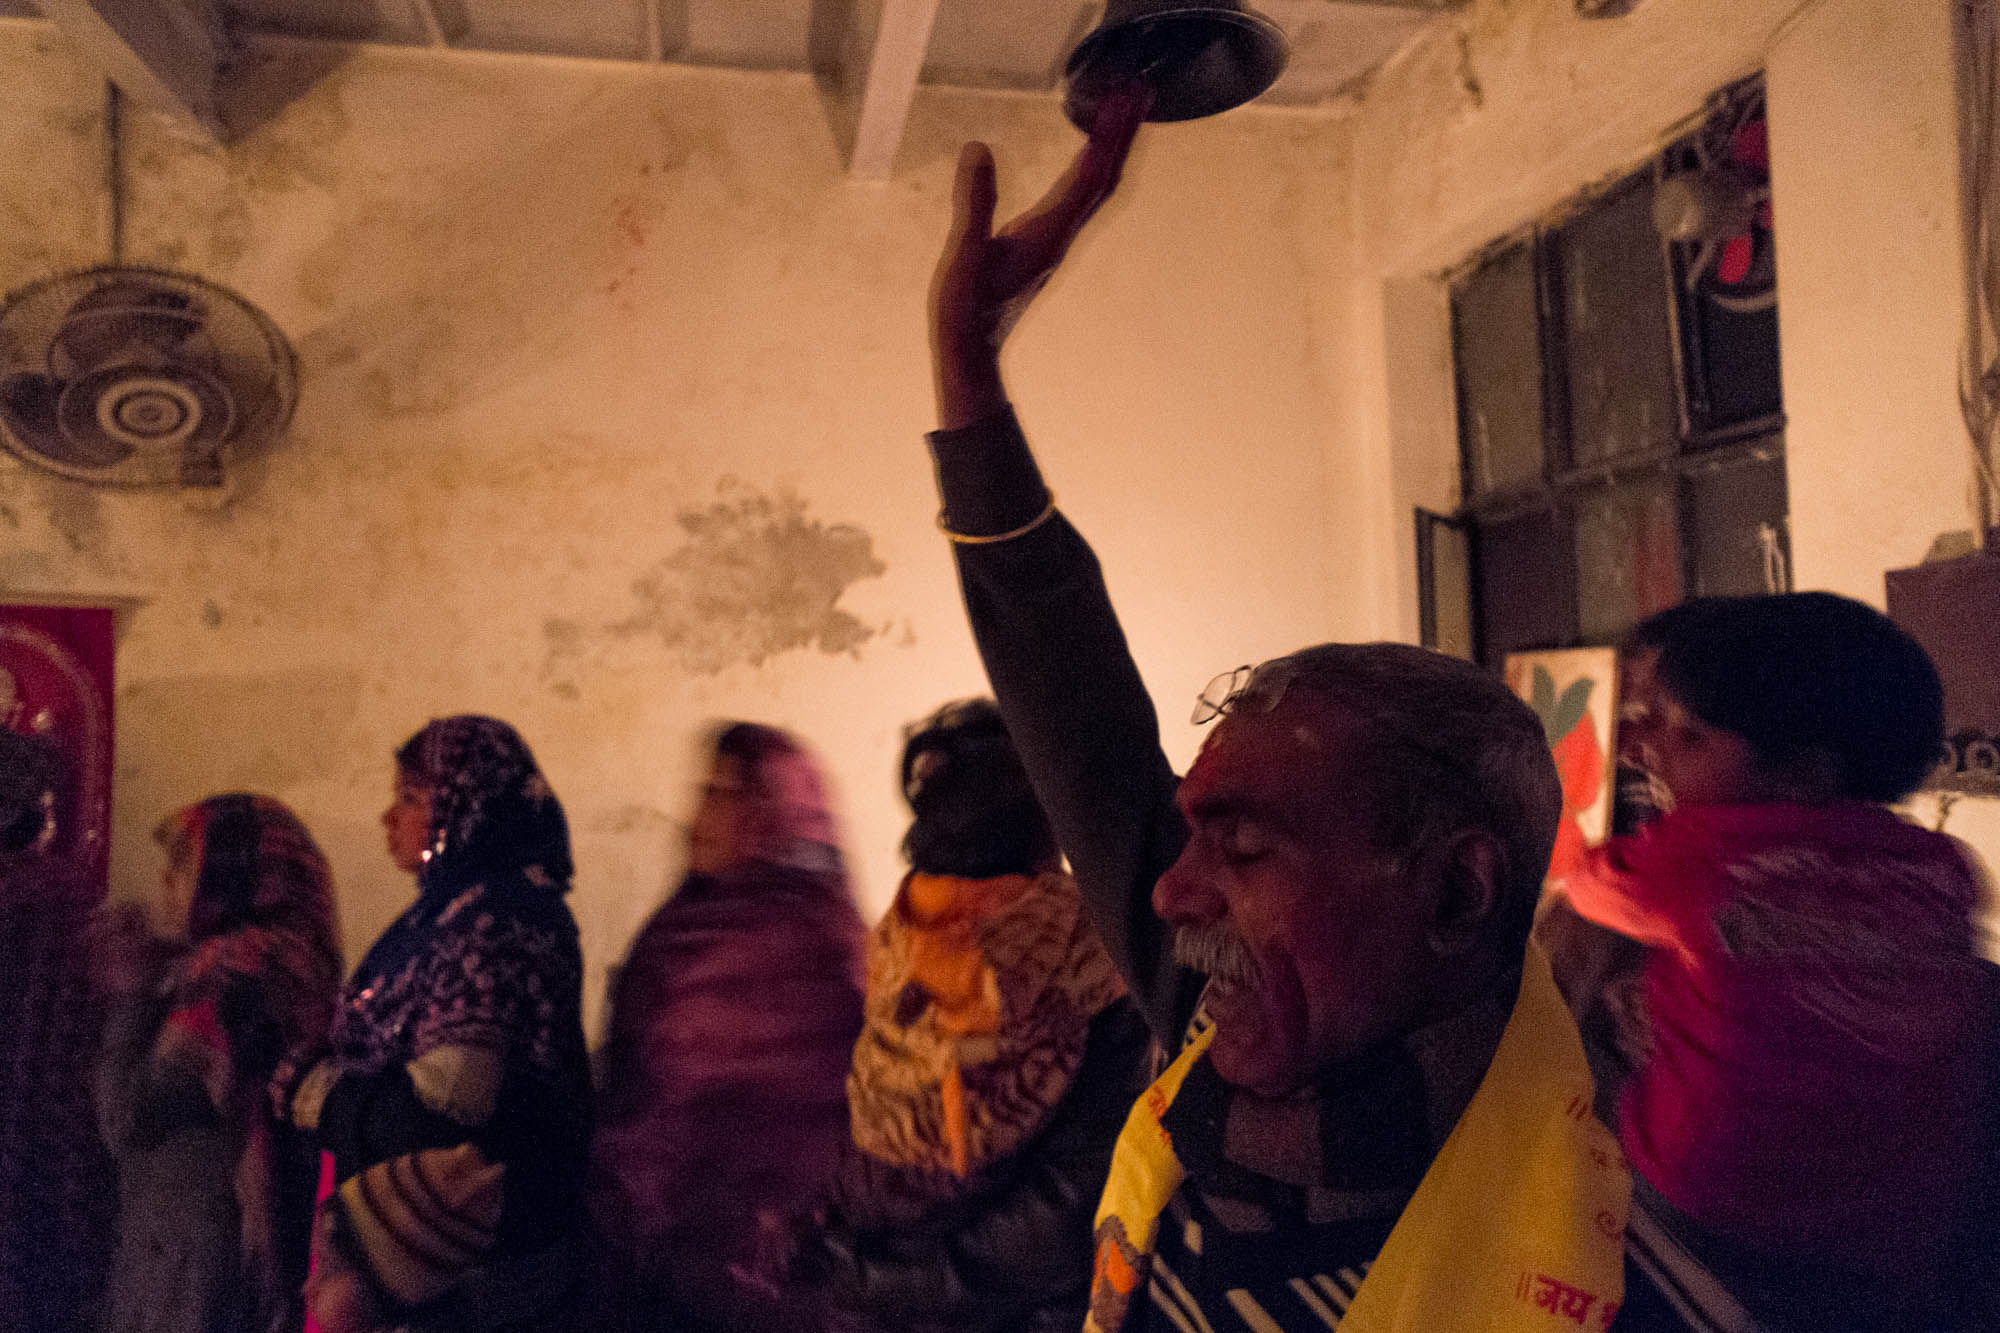  Pandit Bhagat Lal Khokar rings the mandir bell as an invocation to God who will listen to his prathna. Bhagat Lal prayed for the future of Pakistan. In 2015, the Valmiki Mandir chose to celebrate Holi in a somber manner without using the traditional